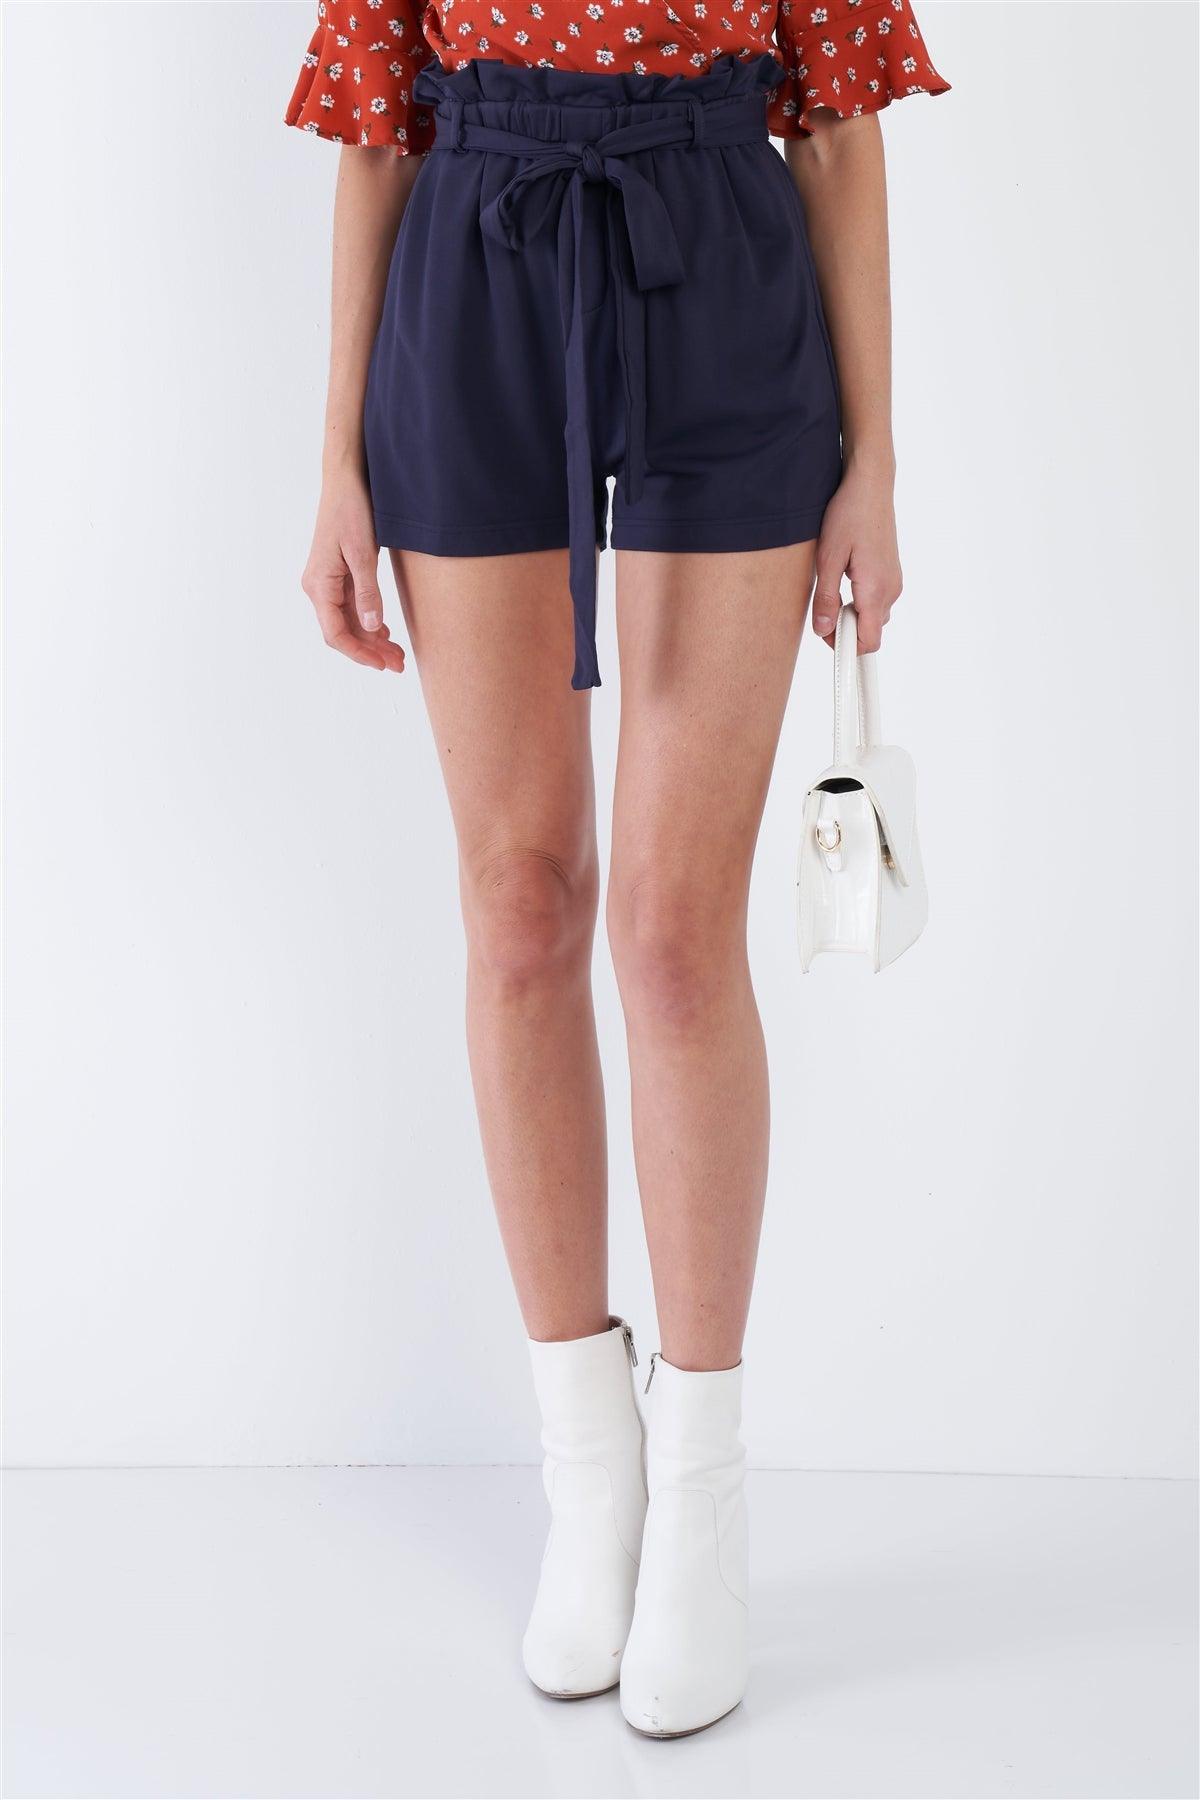 Navy High Waist Frill Trim Casual Office Chic Shorts /3-2-1